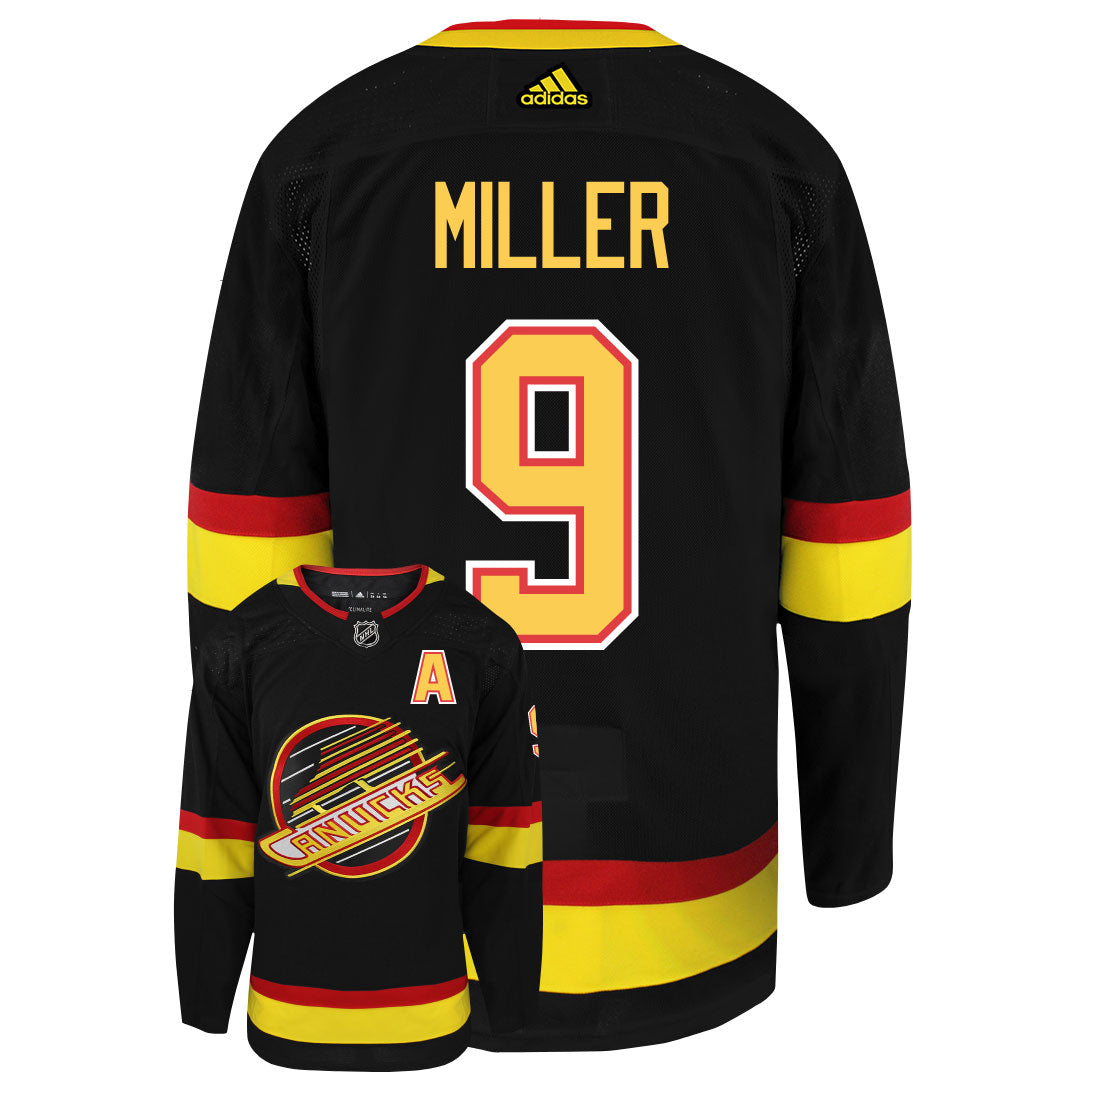 JT Miller Vancouver Canucks Adidas Primegreen Authentic Third Alternate NHL Hockey Jersey - Back/Front View